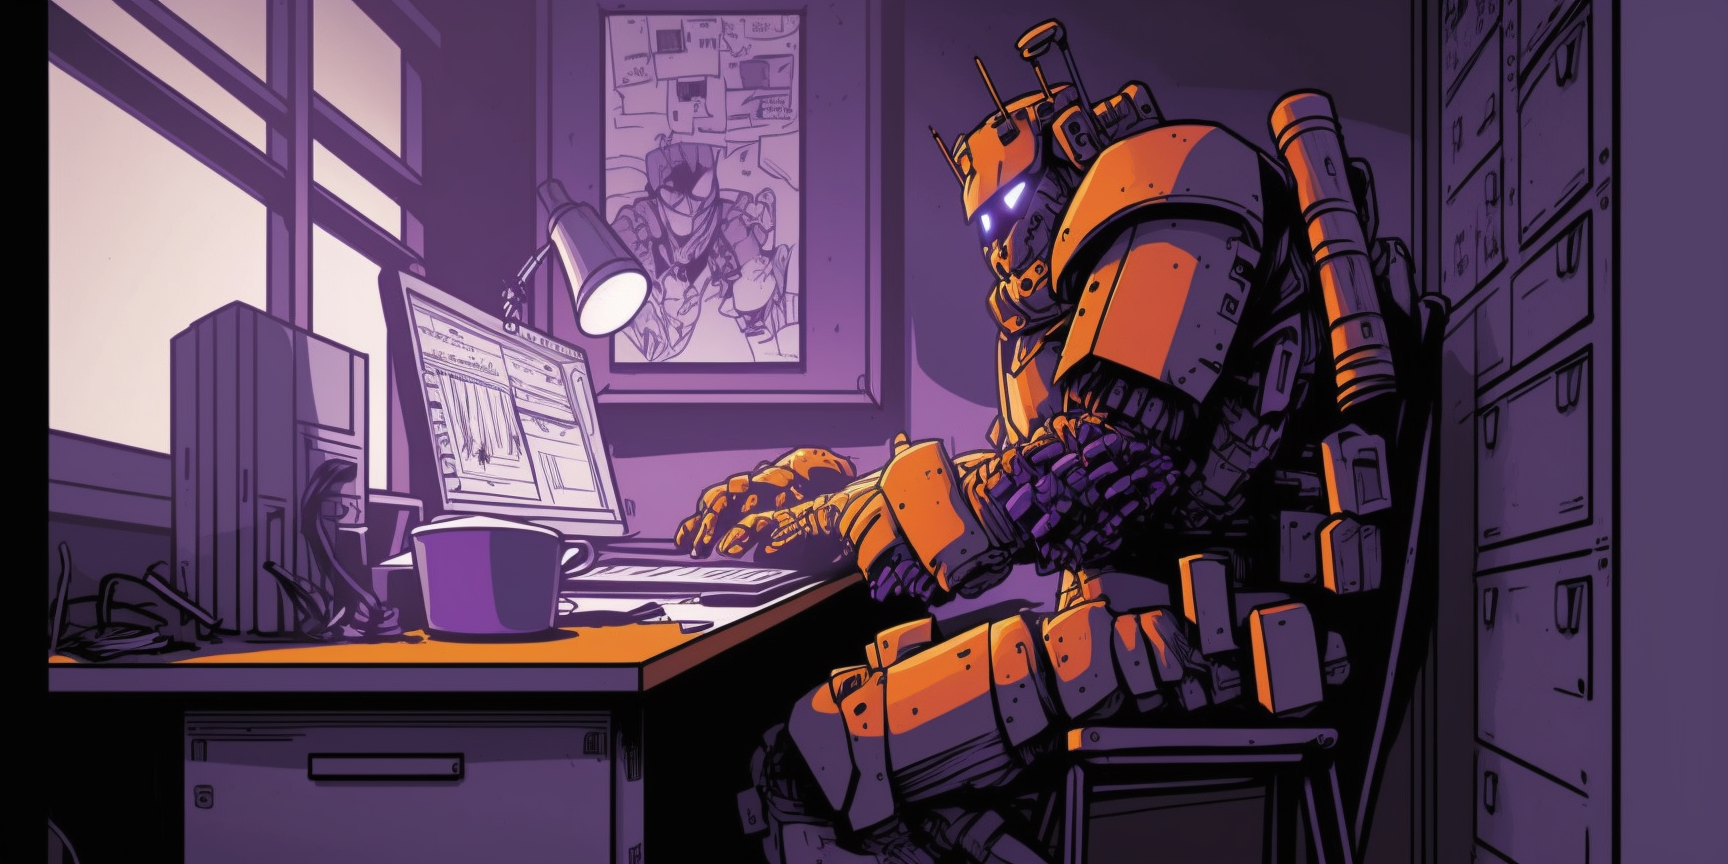 A robot working on a computer in an office.